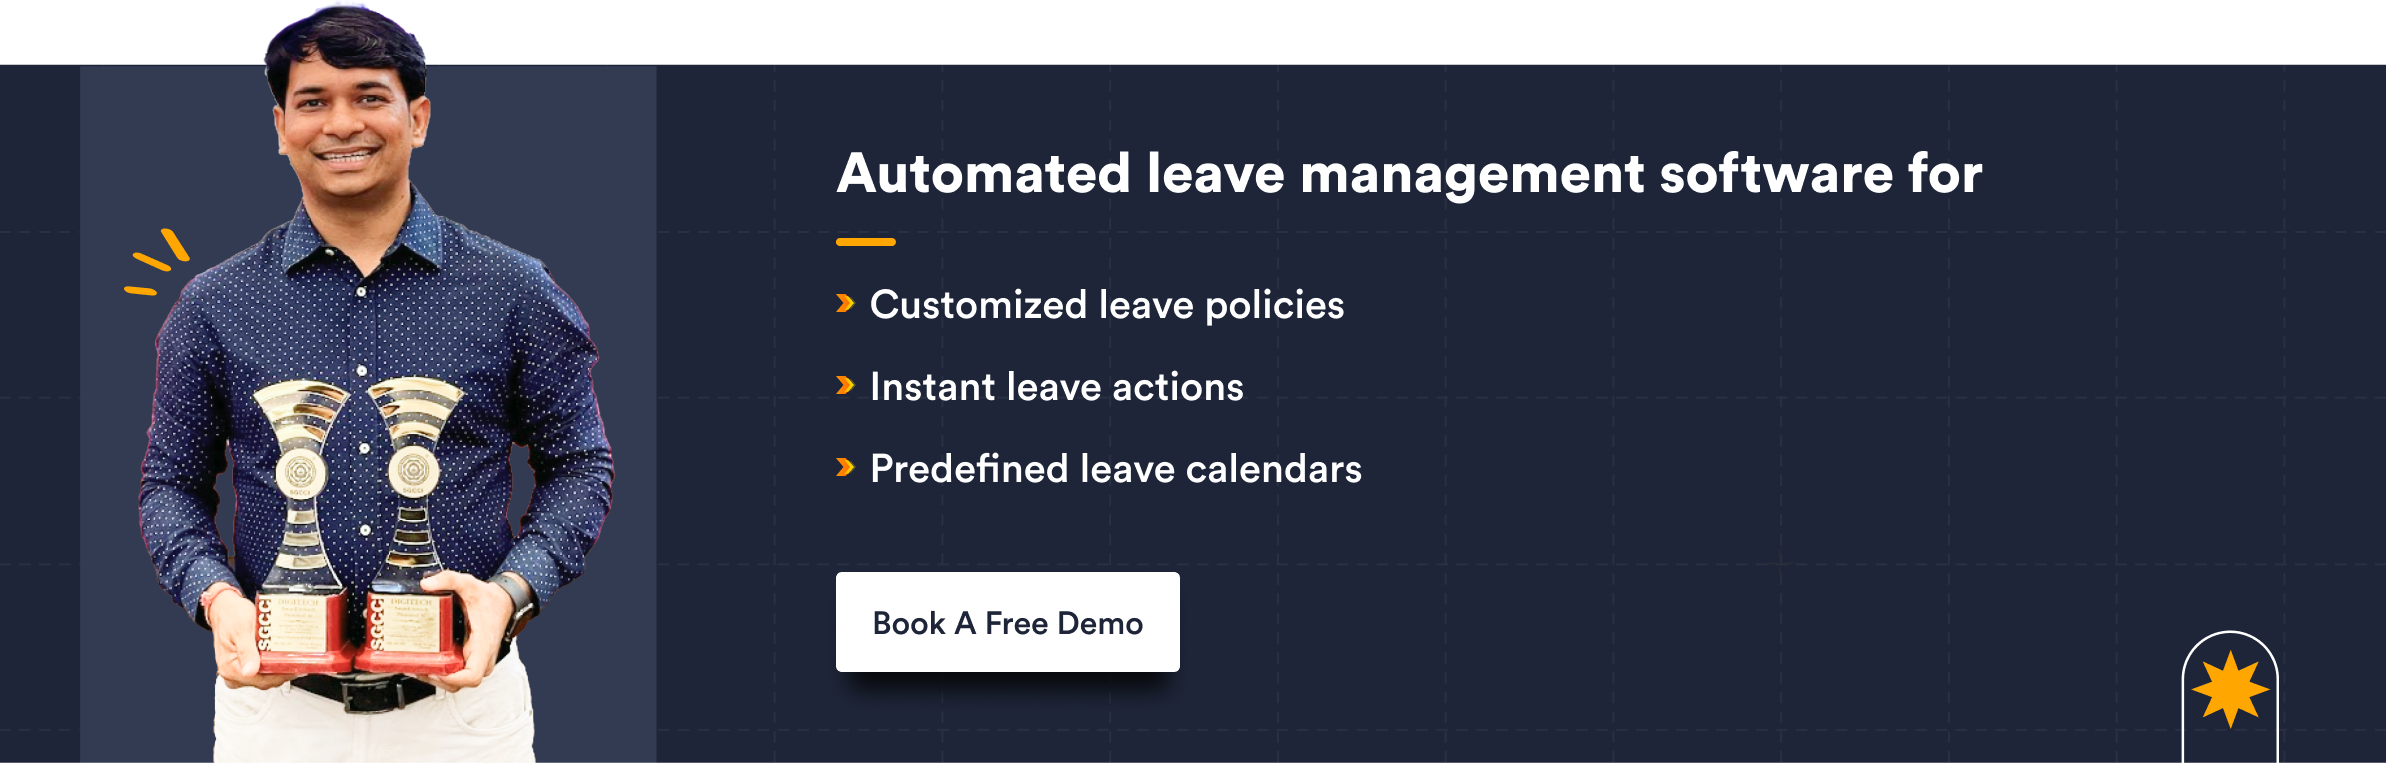 Automated leave management software for